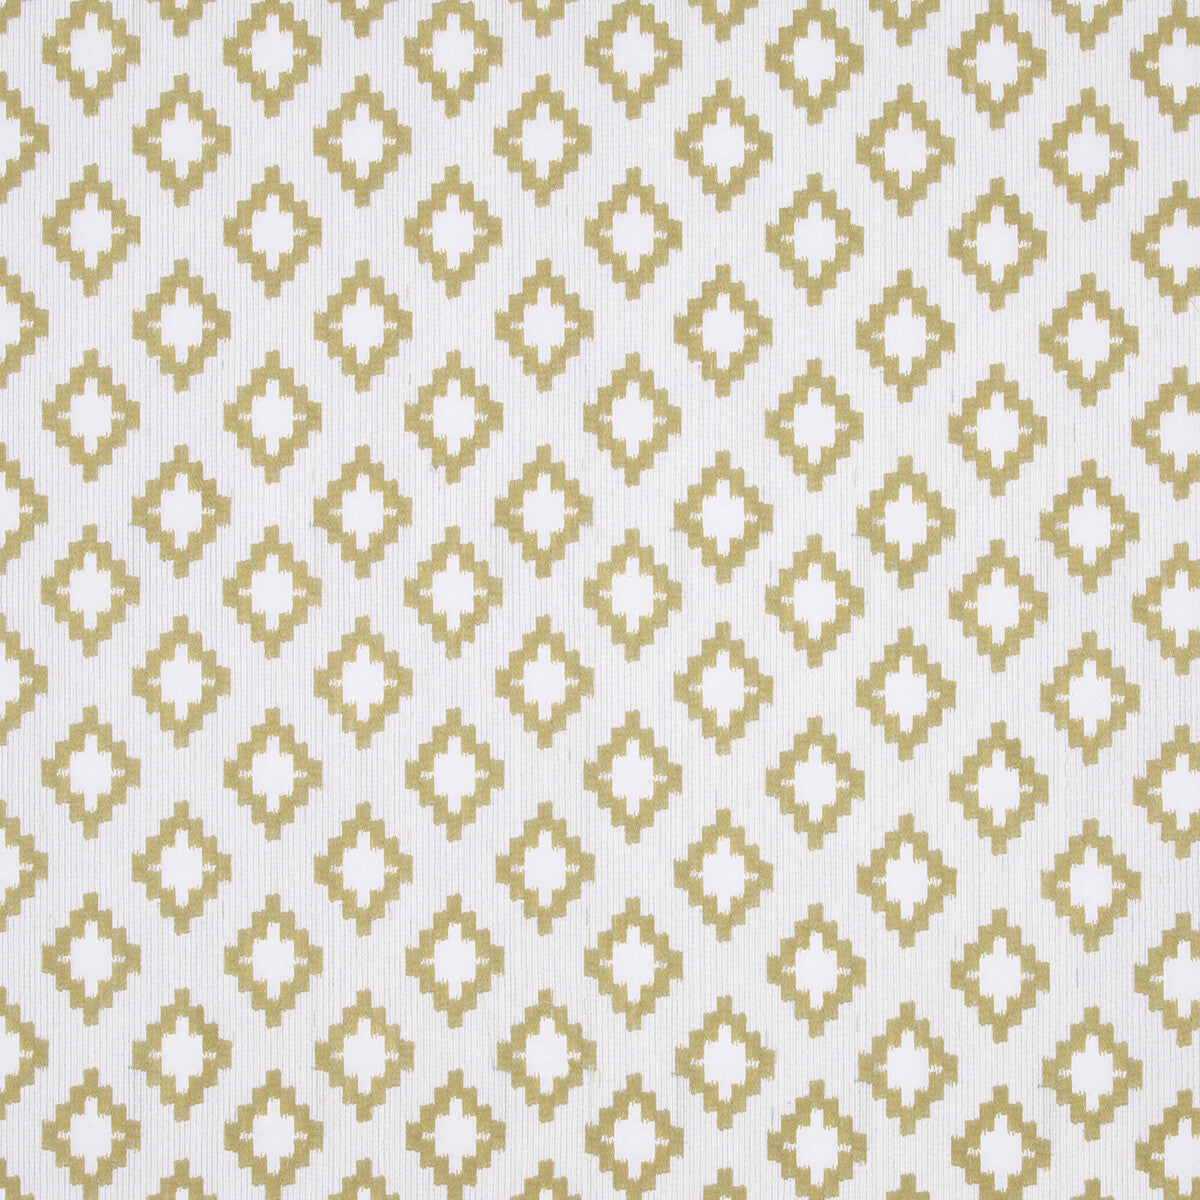 Sefkat fabric in natural color - pattern BF10722.1.0 - by G P &amp; J Baker in the East To West collection